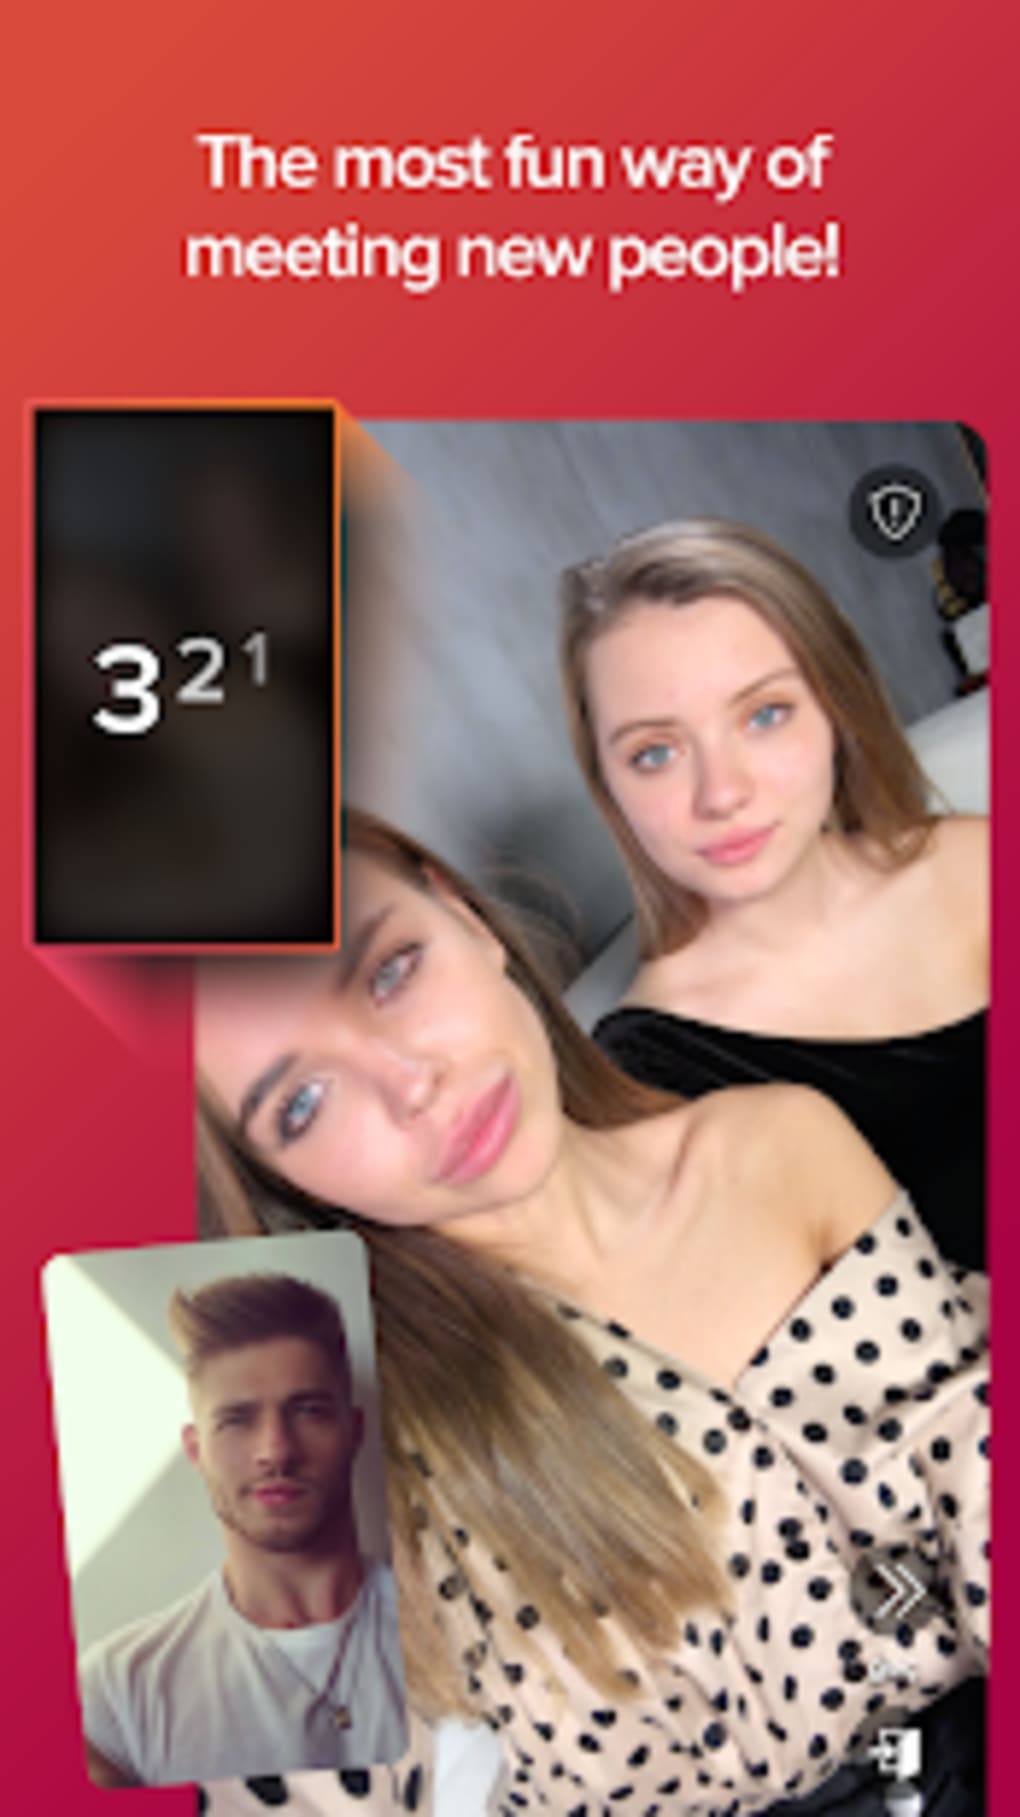 WHO - Live video chat Match Meet me APK for Android